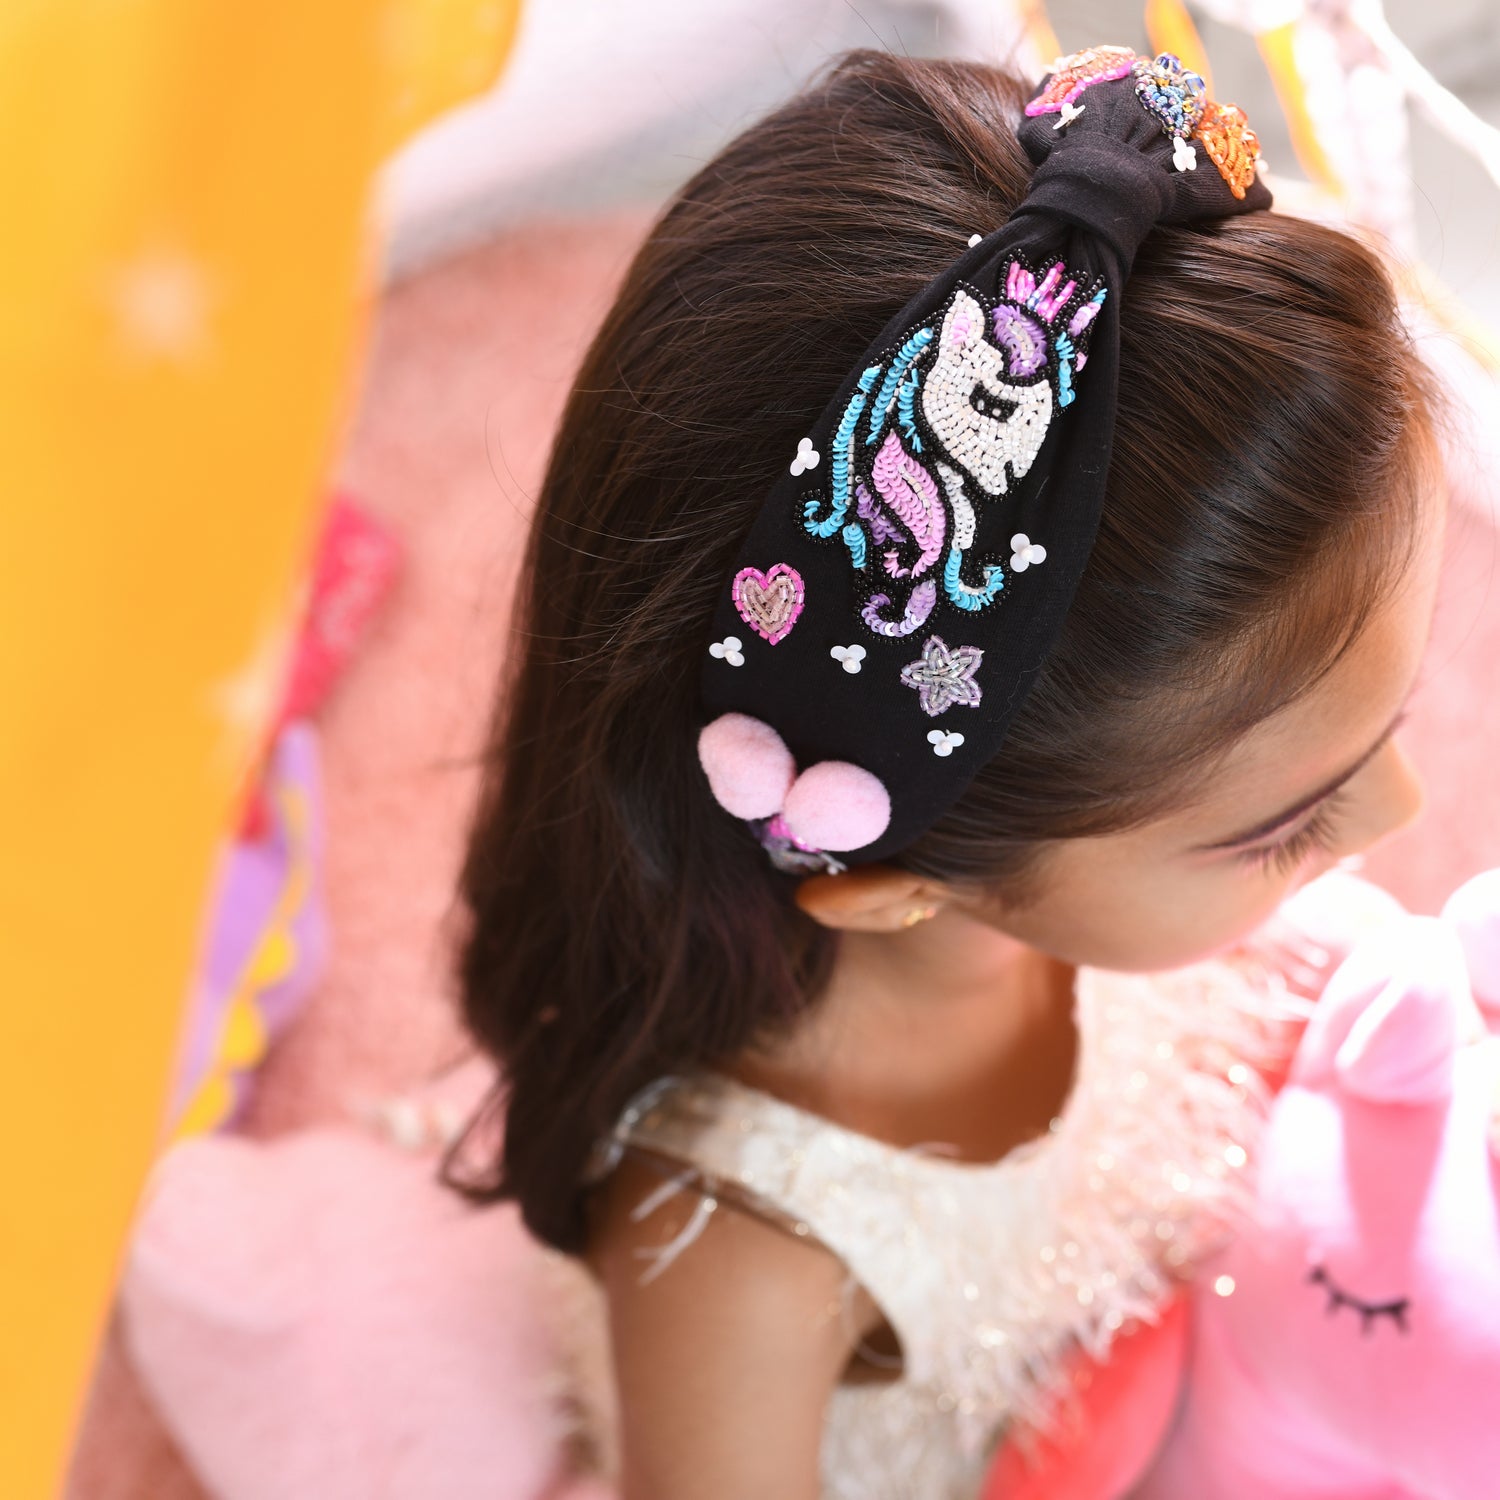 Elsa Headband in Embroidered Motifs - Candy land